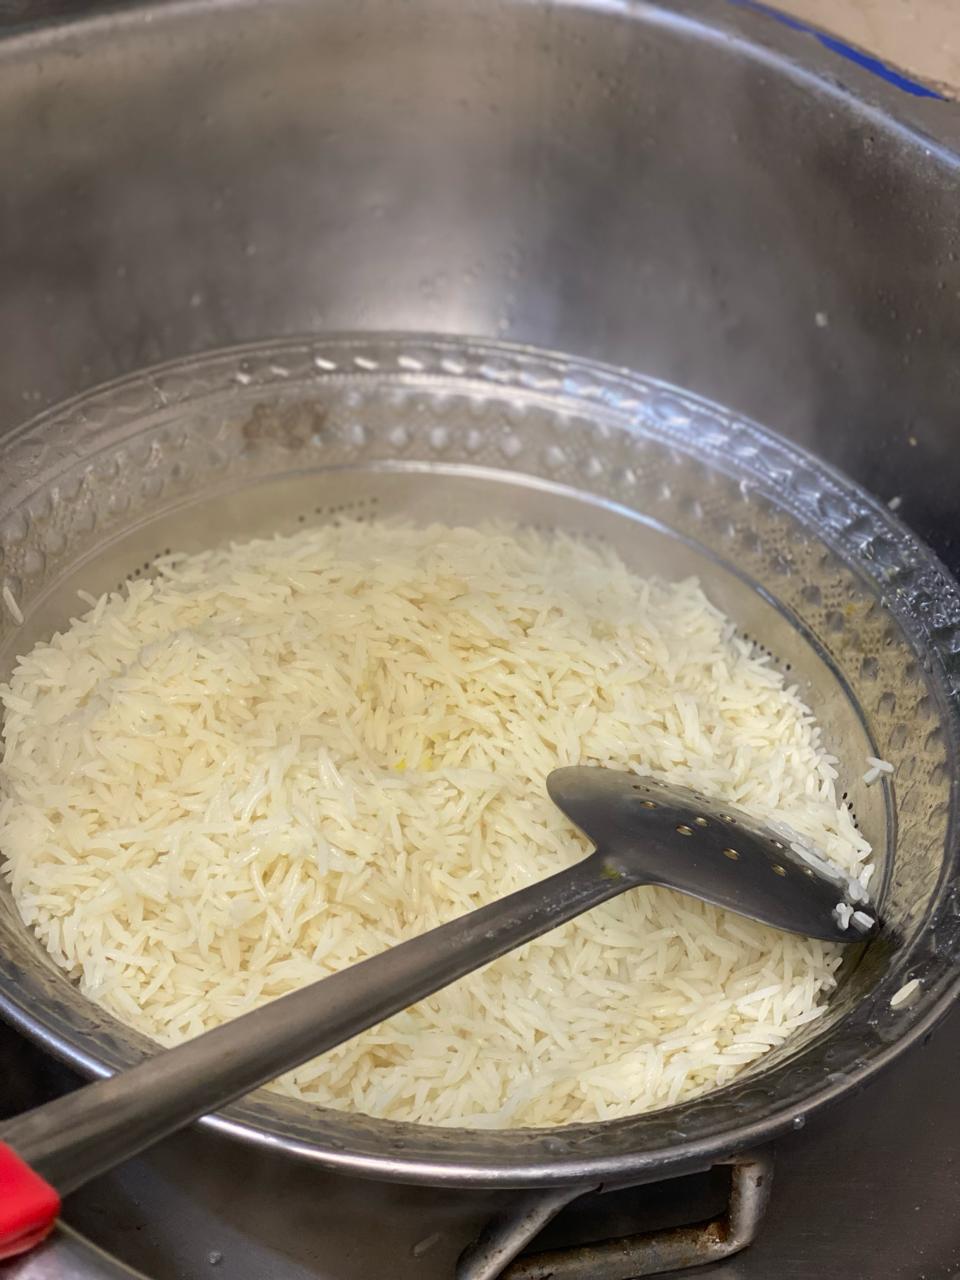 rinse the rice